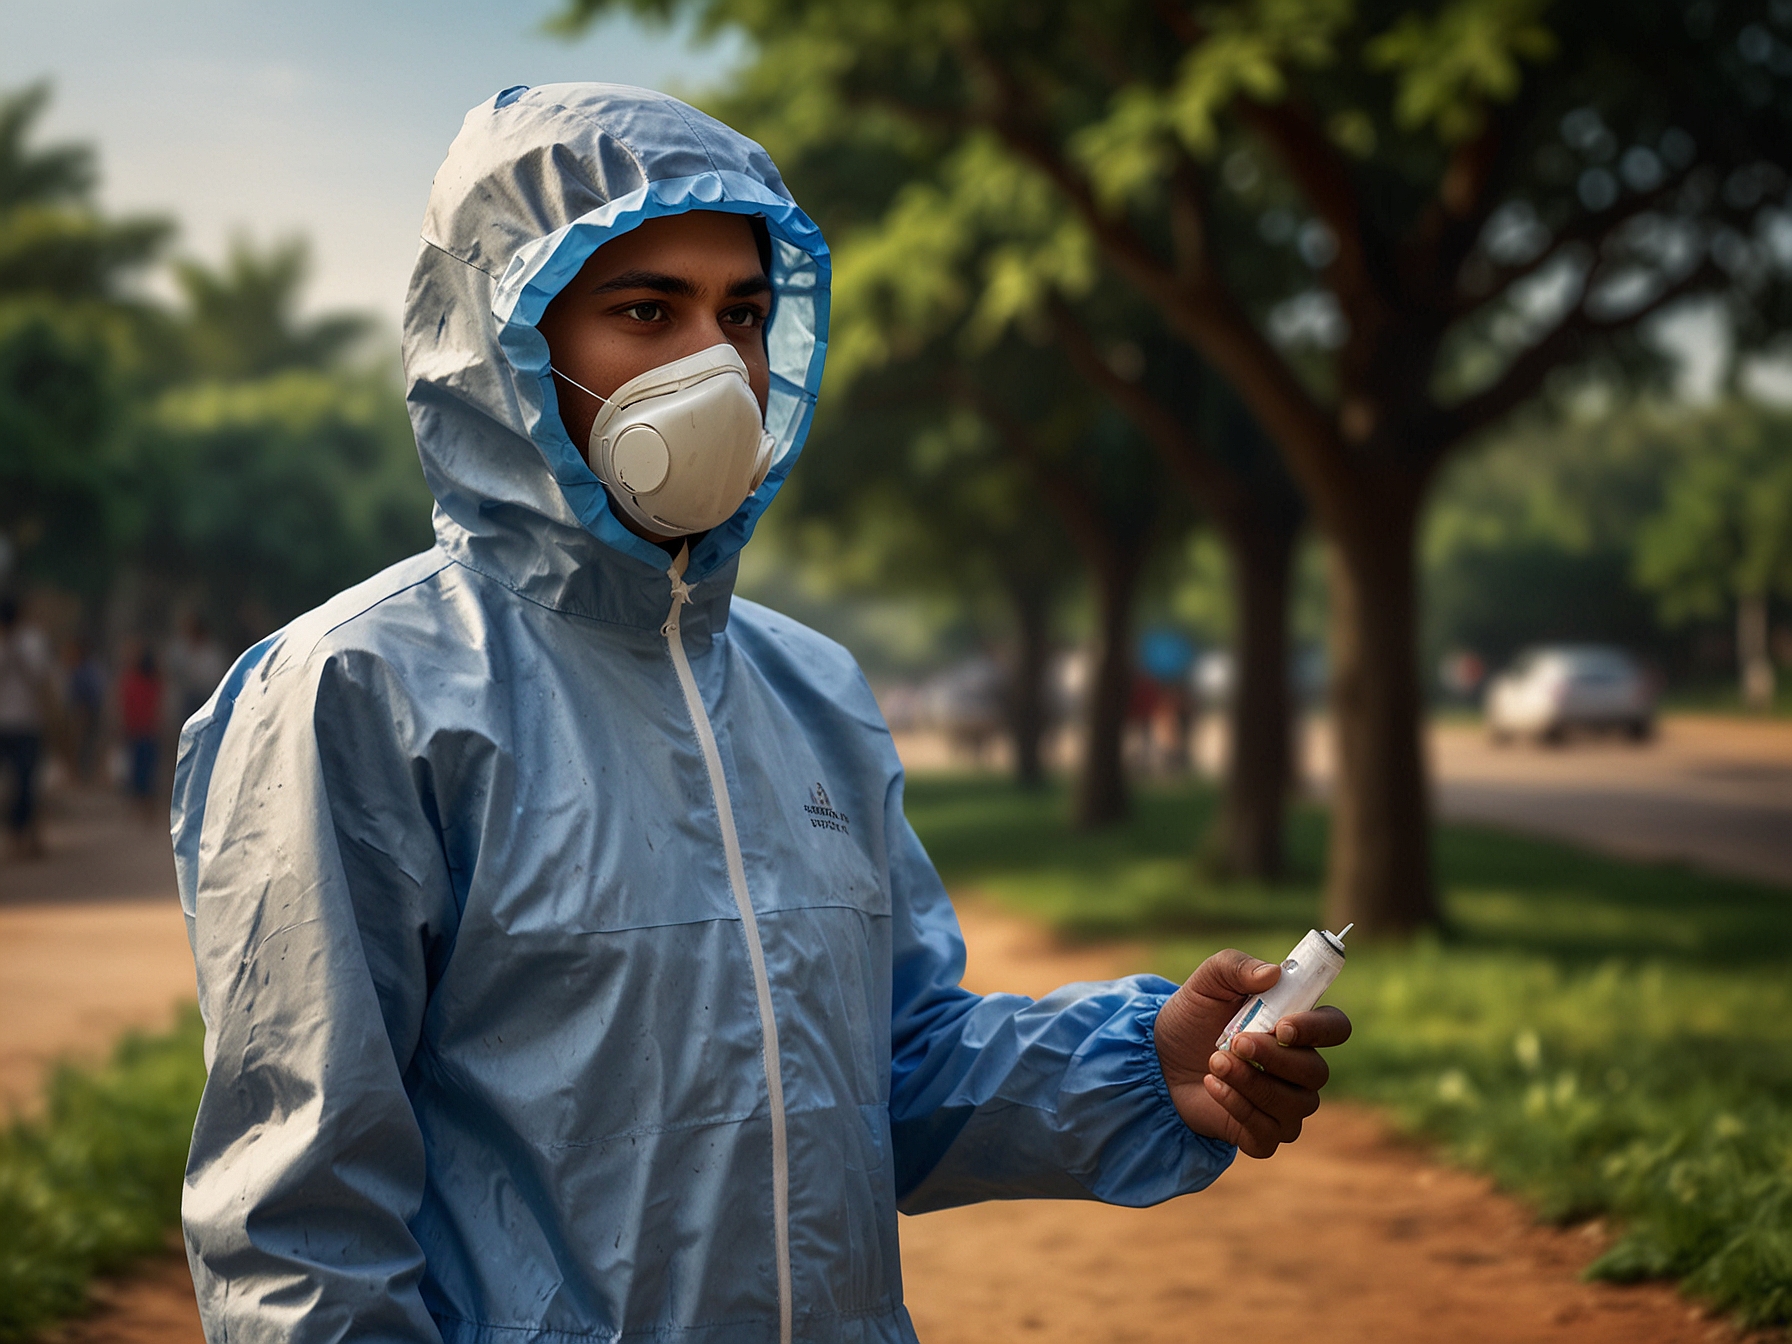 An individual demonstrating the use of mosquito repellent and wearing protective clothing outdoors in Pune. Preventive actions such as these are crucial in controlling the spread of Zika virus.